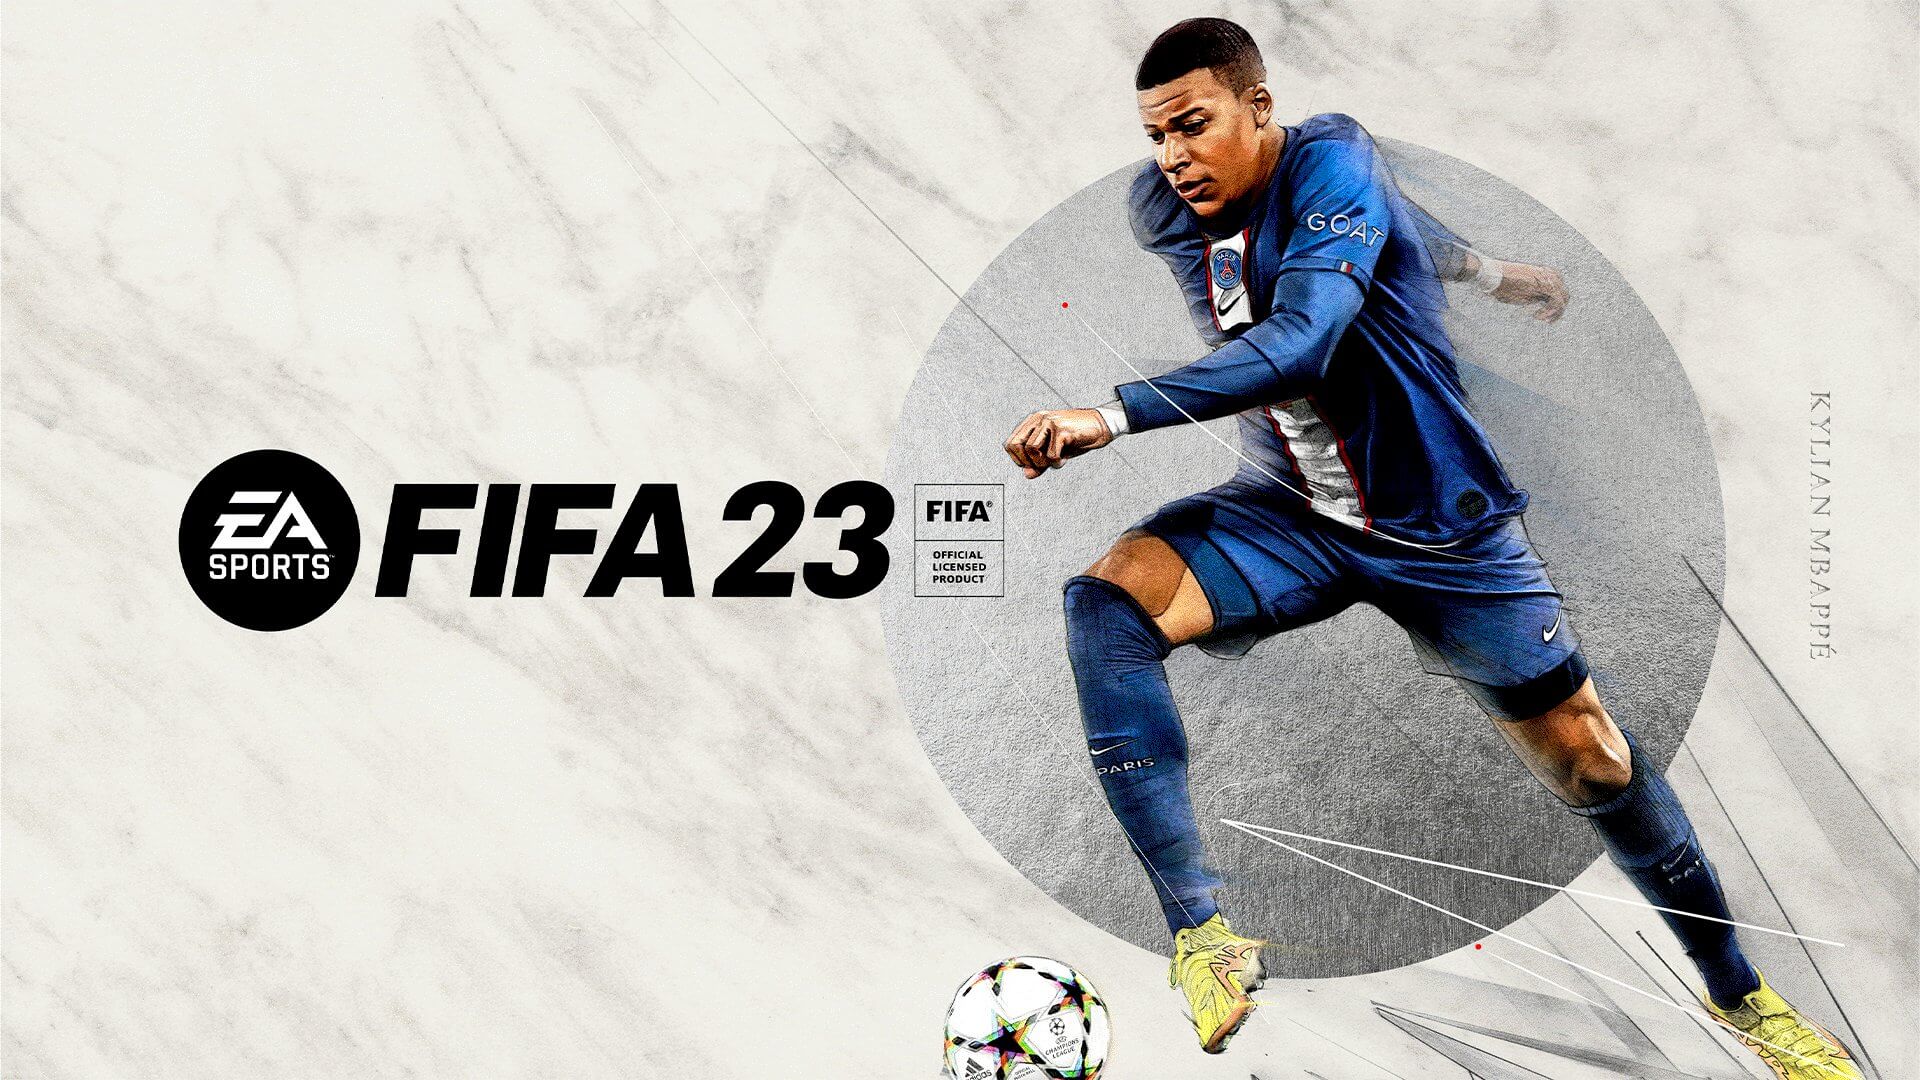 EA SPORTS™ FIFA 23 Delivers the Most Complete Interactive Football  Experience Yet, with HyperMotion2, Generational Cross-Play, Women's Club  Football, and Both Men's and Women's FIFA World Cups™